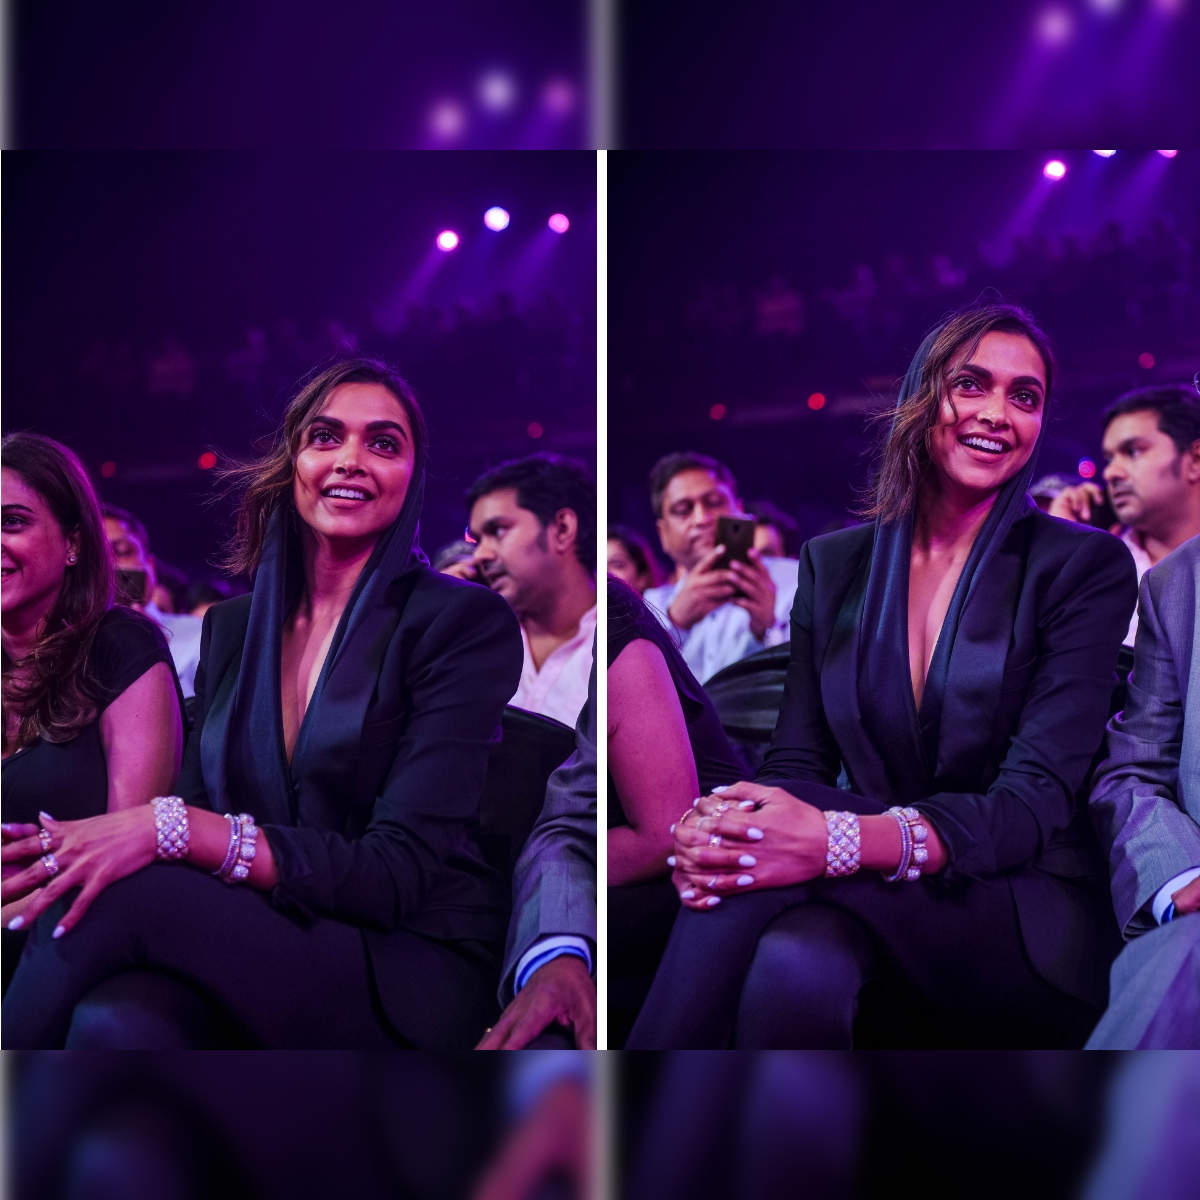 Times when Deepika Padukone rocked power dressing in pant suits!